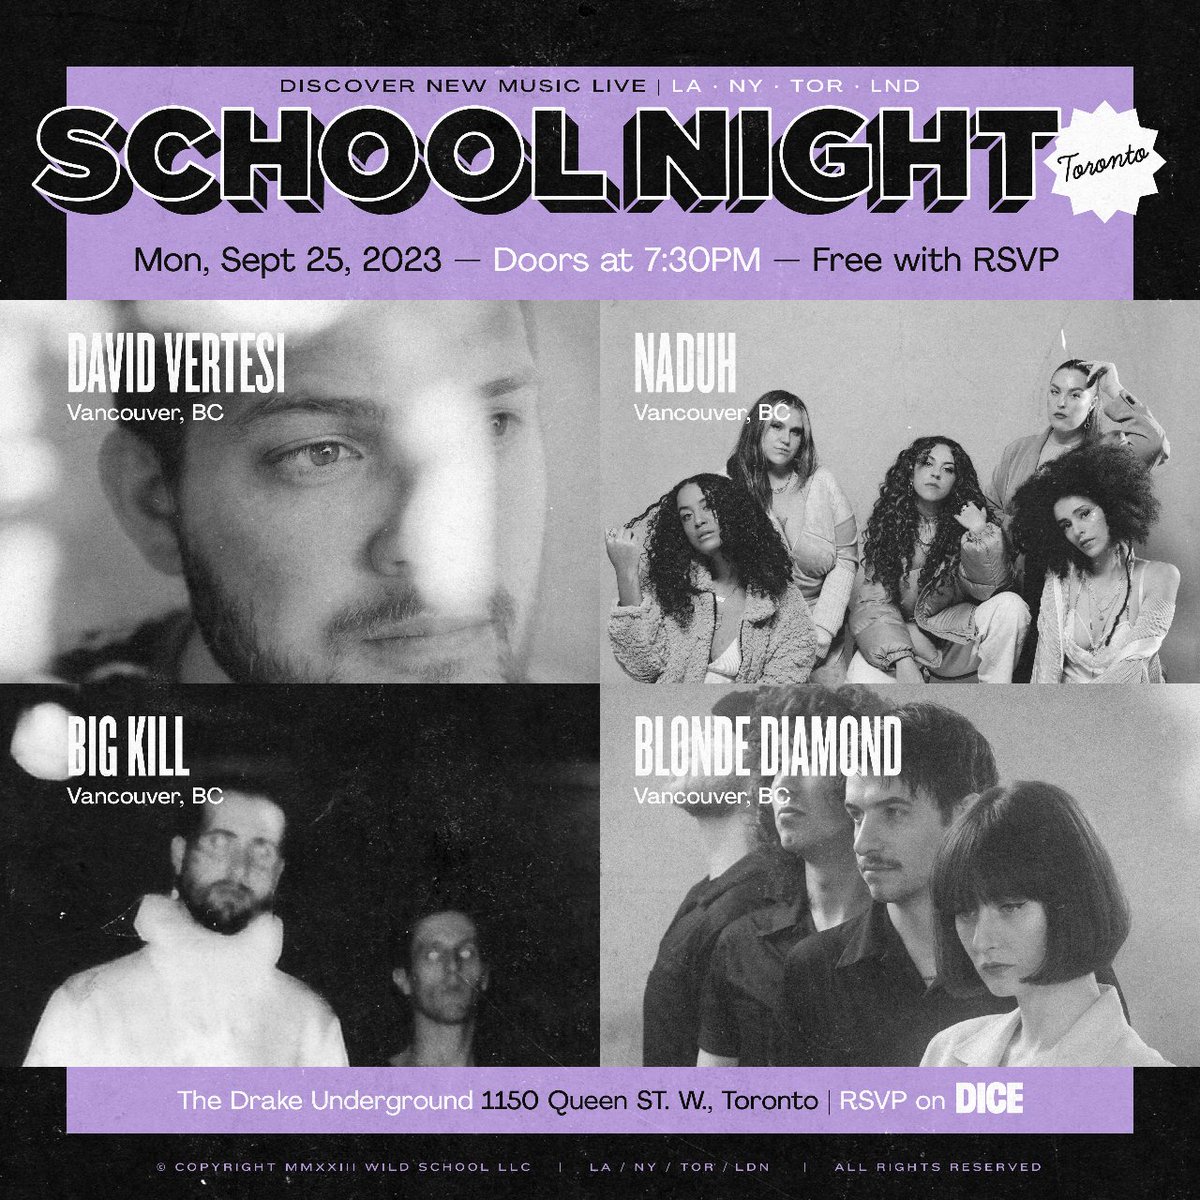 We are excited to be partnering with @schoolnightTO for a showcase of BC talent this Monday at @thedrakehotel! 🎶 Catch @BIGKILLfuture, @bldiamondmusic, @davidvertesi, and @ItsNaduh take over the stage. RSVP to attend for free✨🔗 link.dice.fm/h09cc0b05111